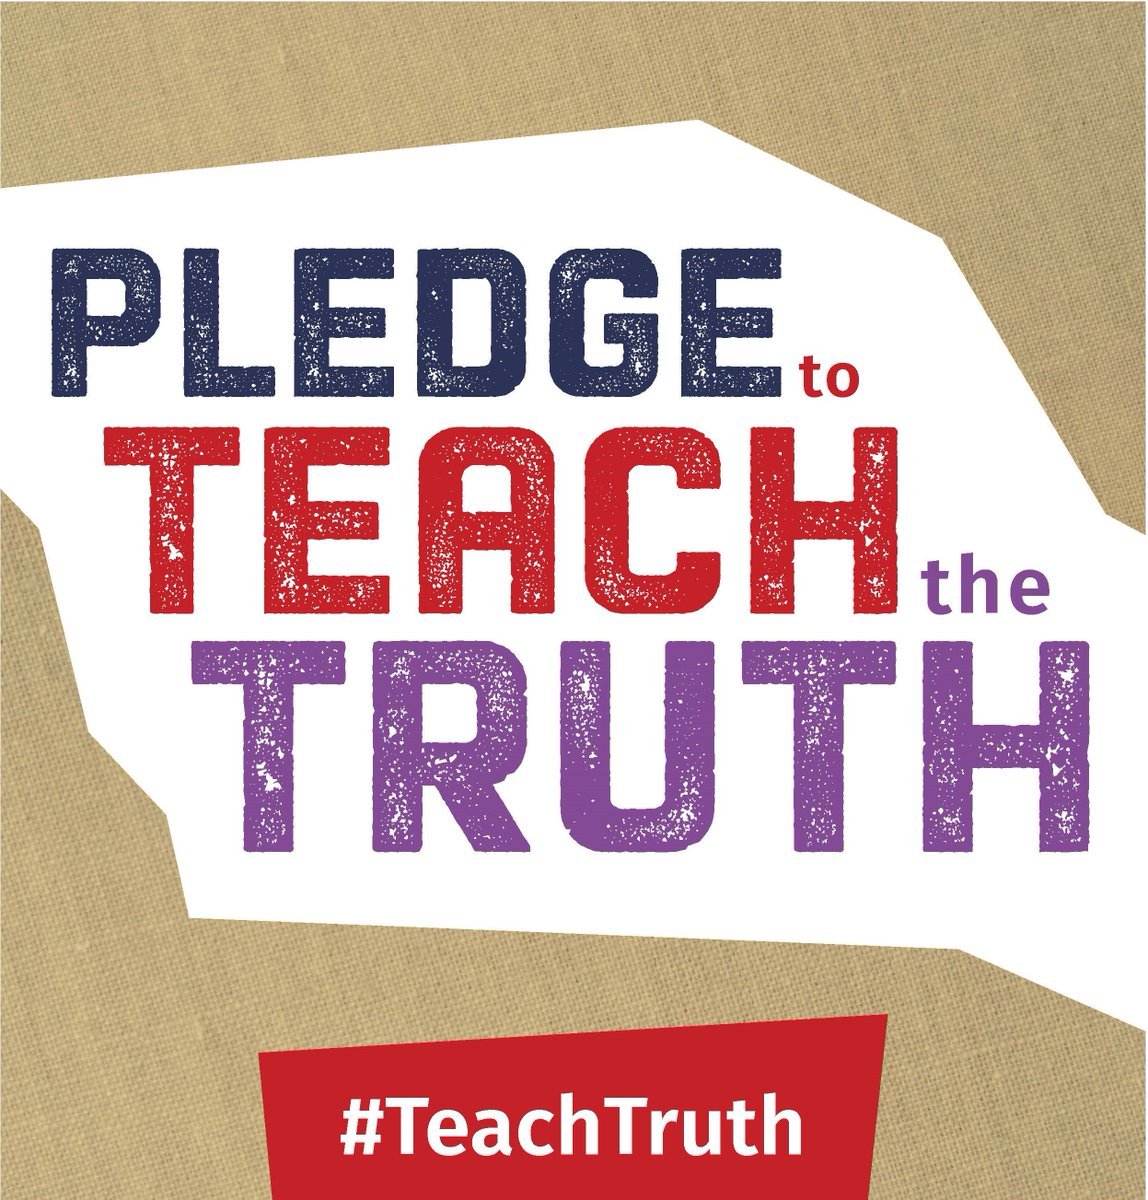 Education must equip students with the knowledge they need to drive change in policy and in culture, and foster the confidence needed to pursue transformation in their communities. DHS supports teachers, students, and educators across the state!

#TeachTruth #FreedomtoLearn